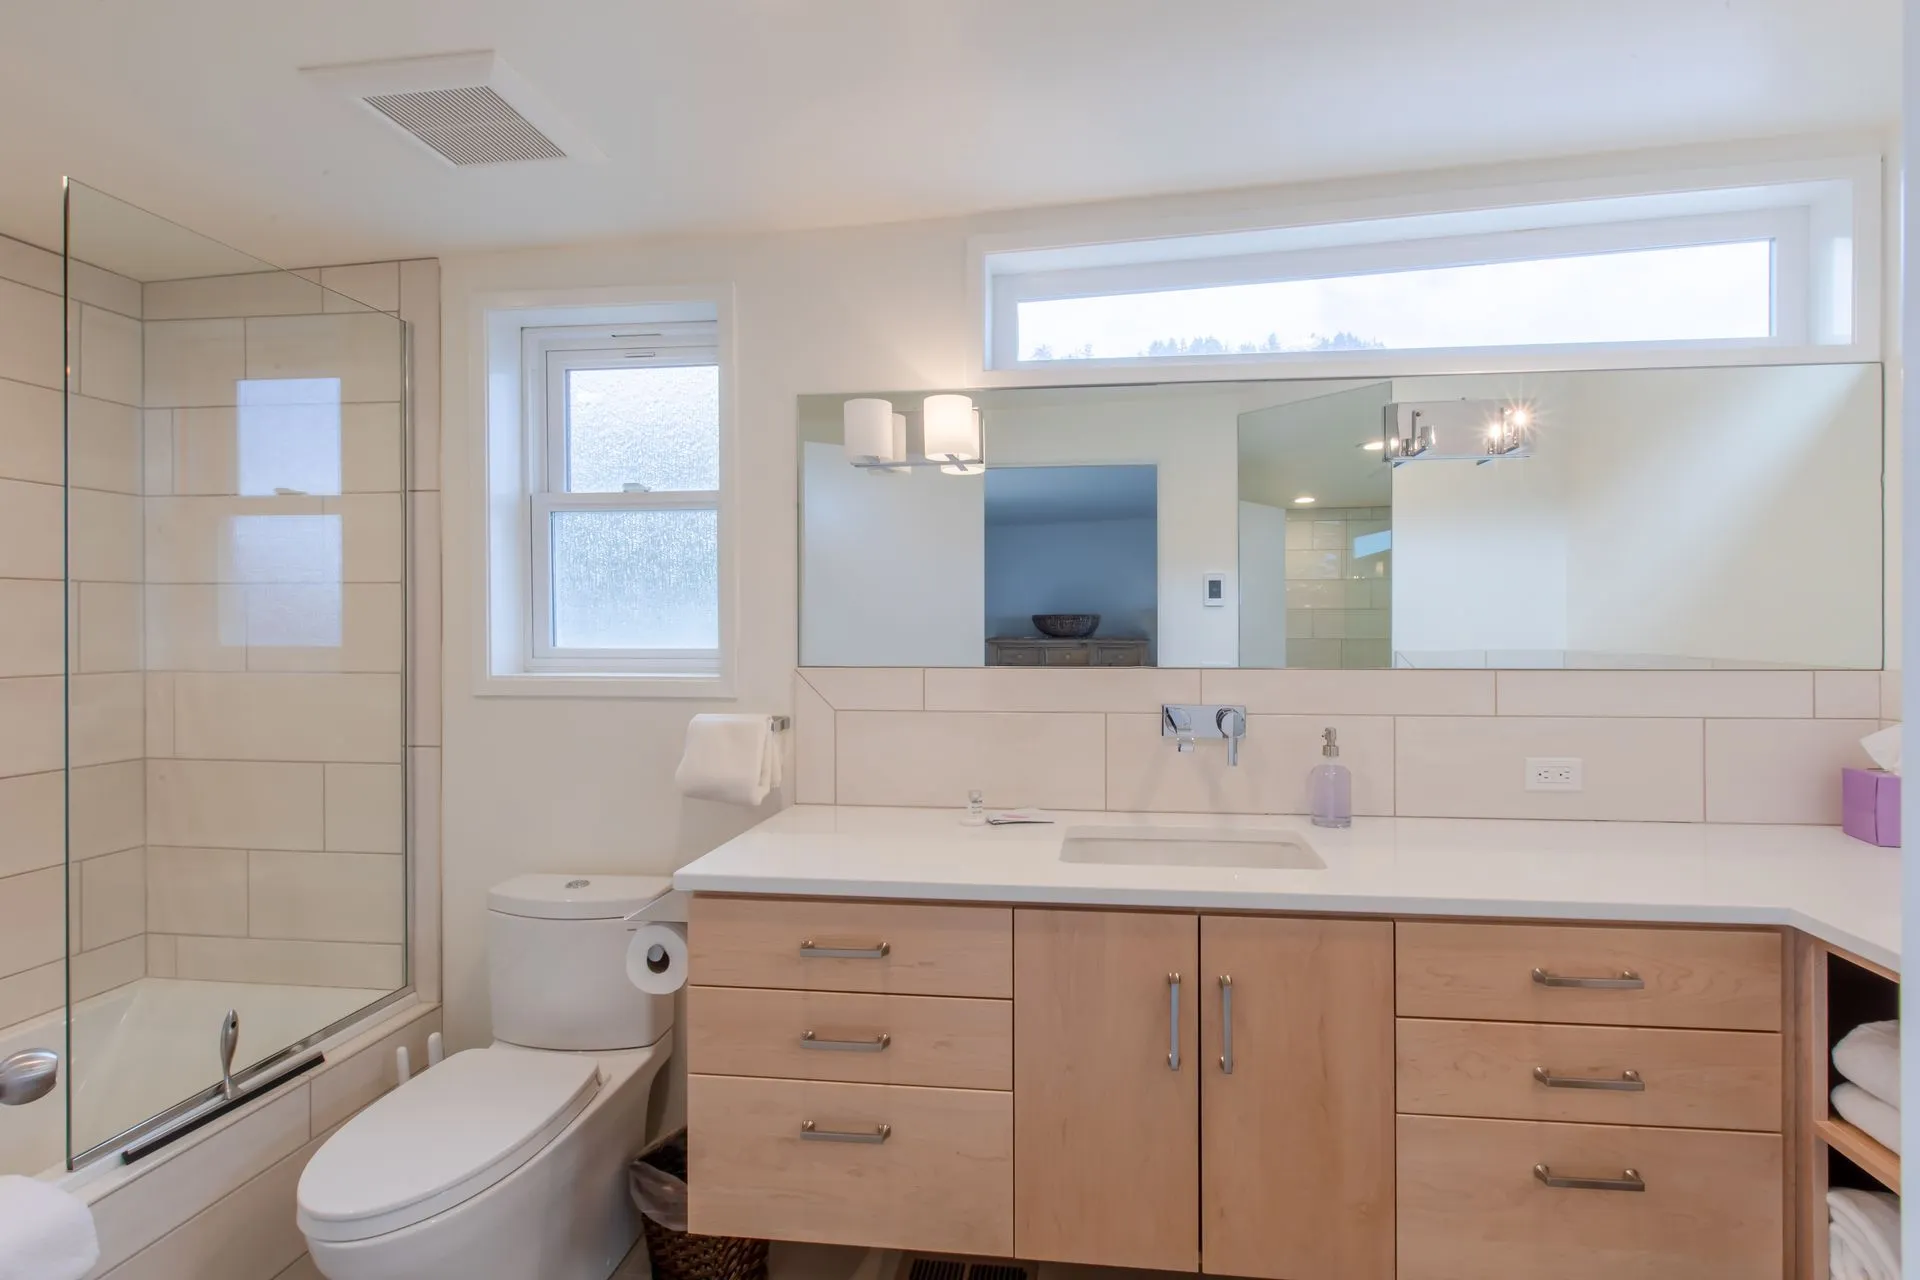 Vacation Rental in Cannon Beach, Sona Tra bathroom with large mirror and counter